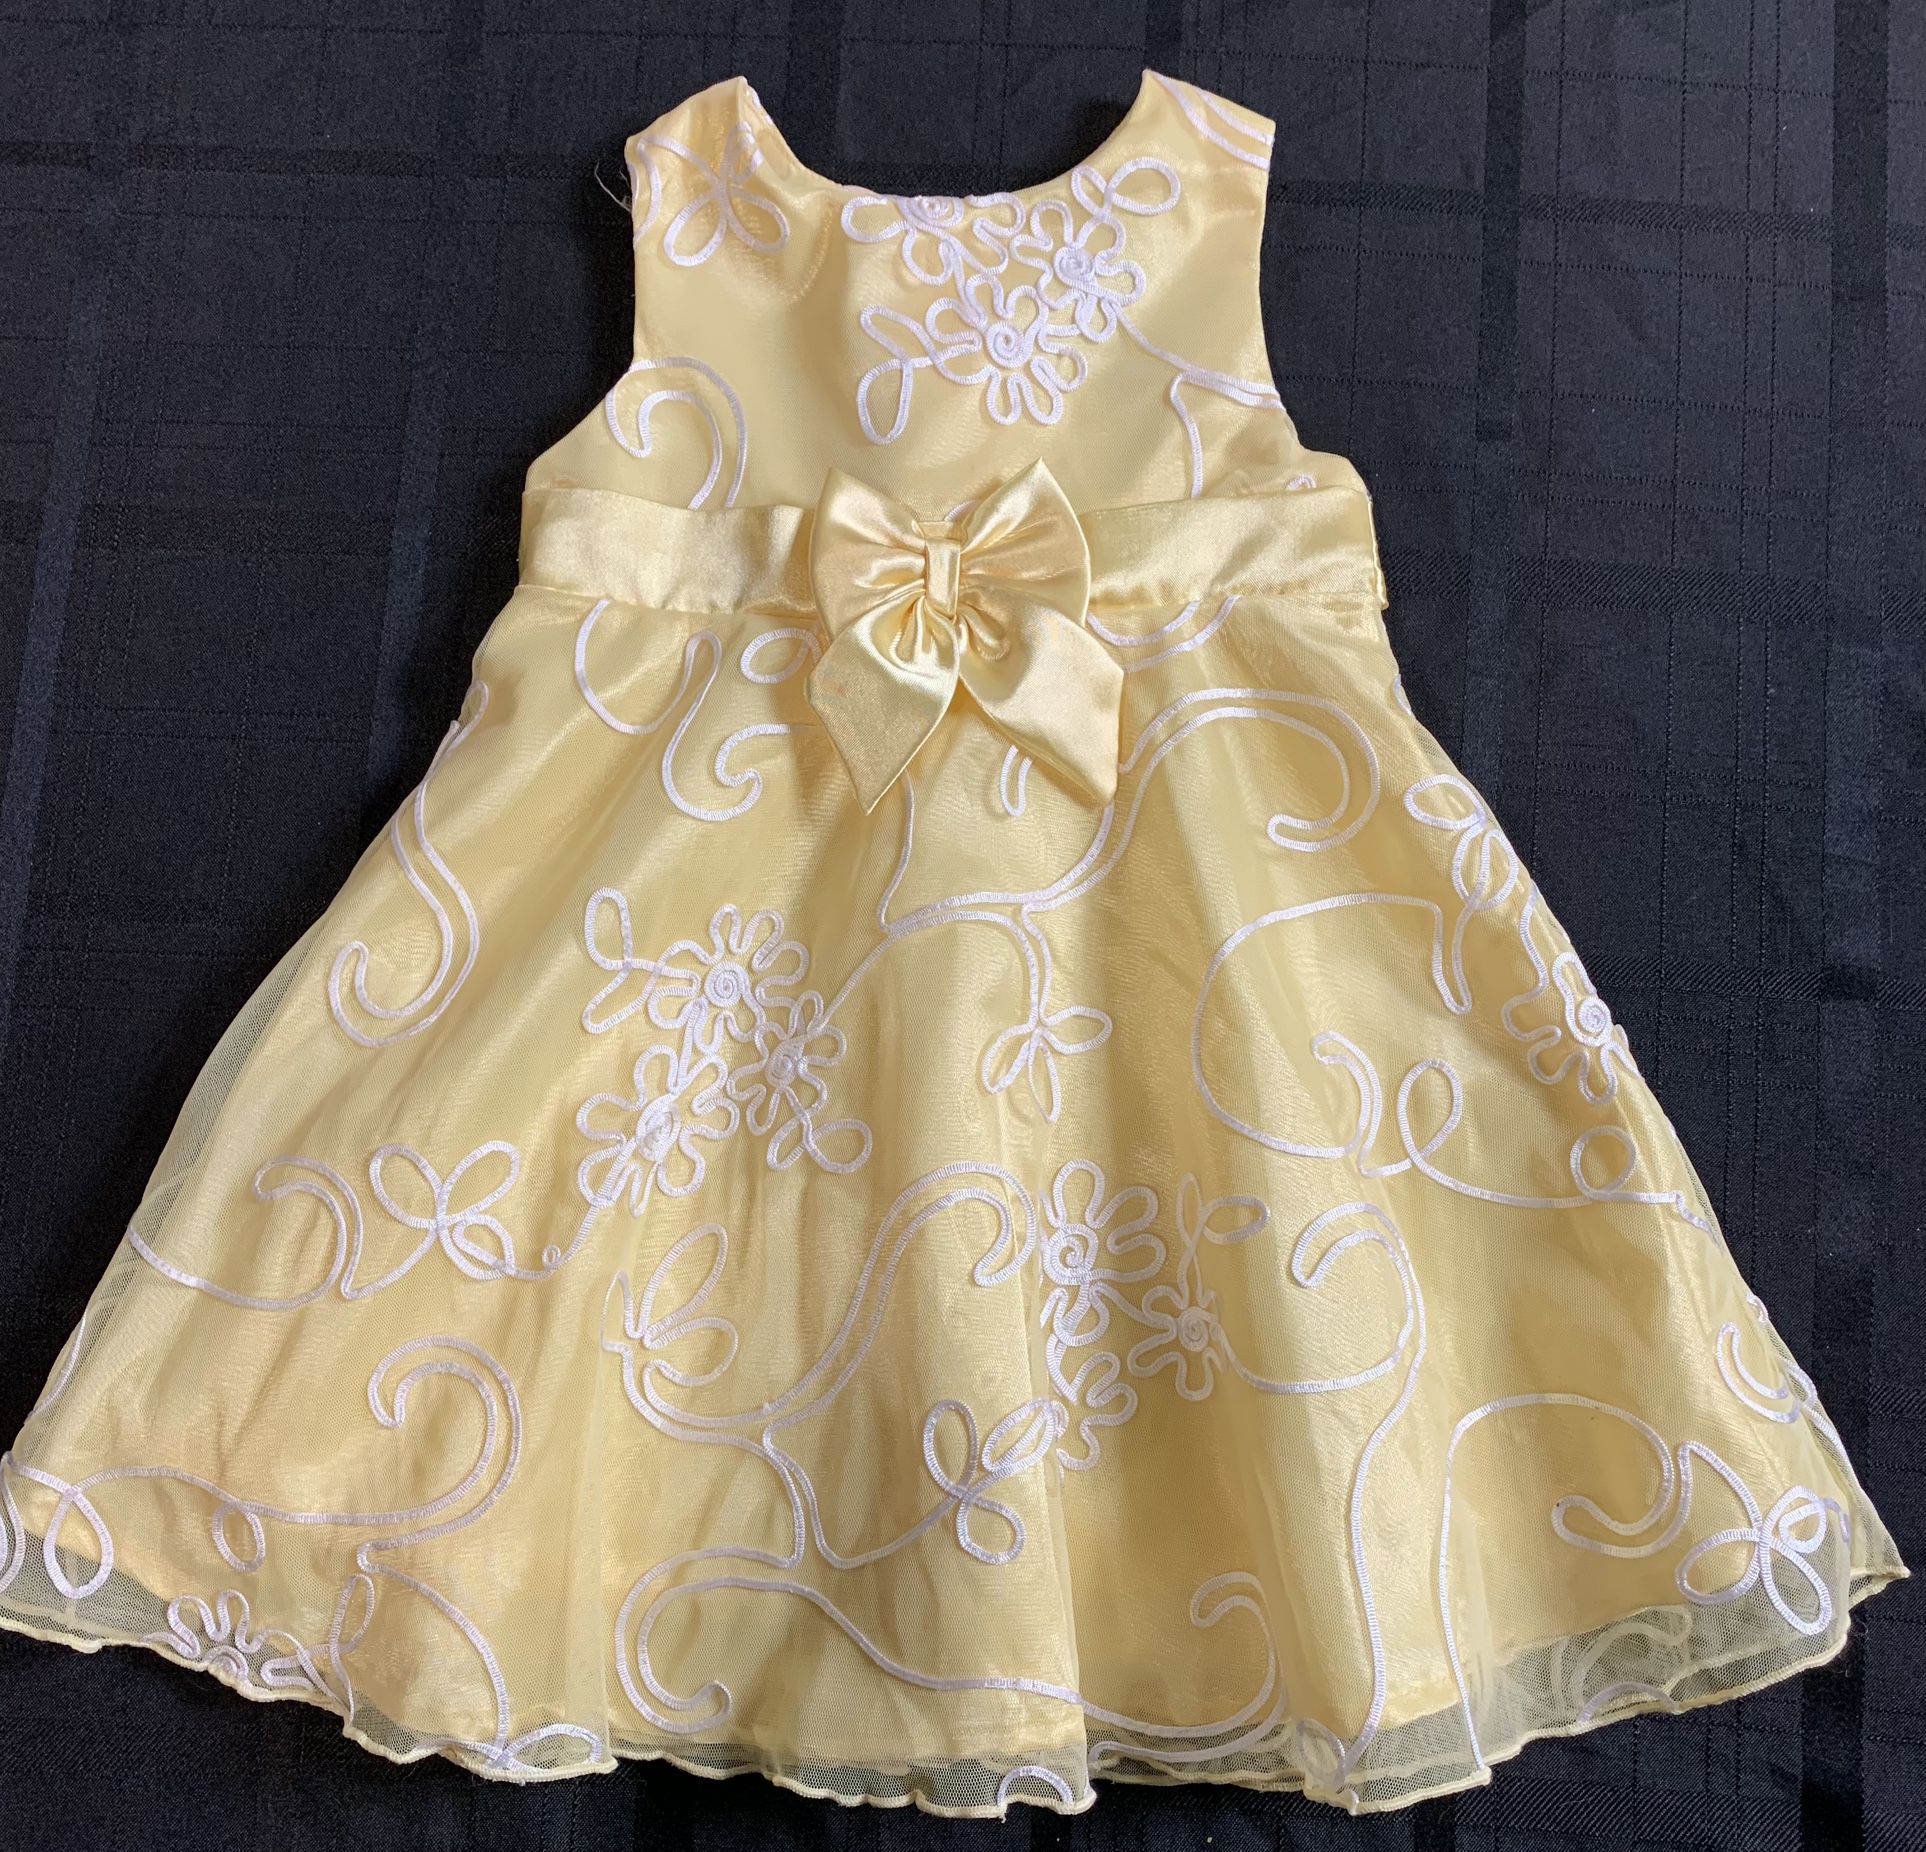 George toddler girls size 3T yellow spring easter dress 